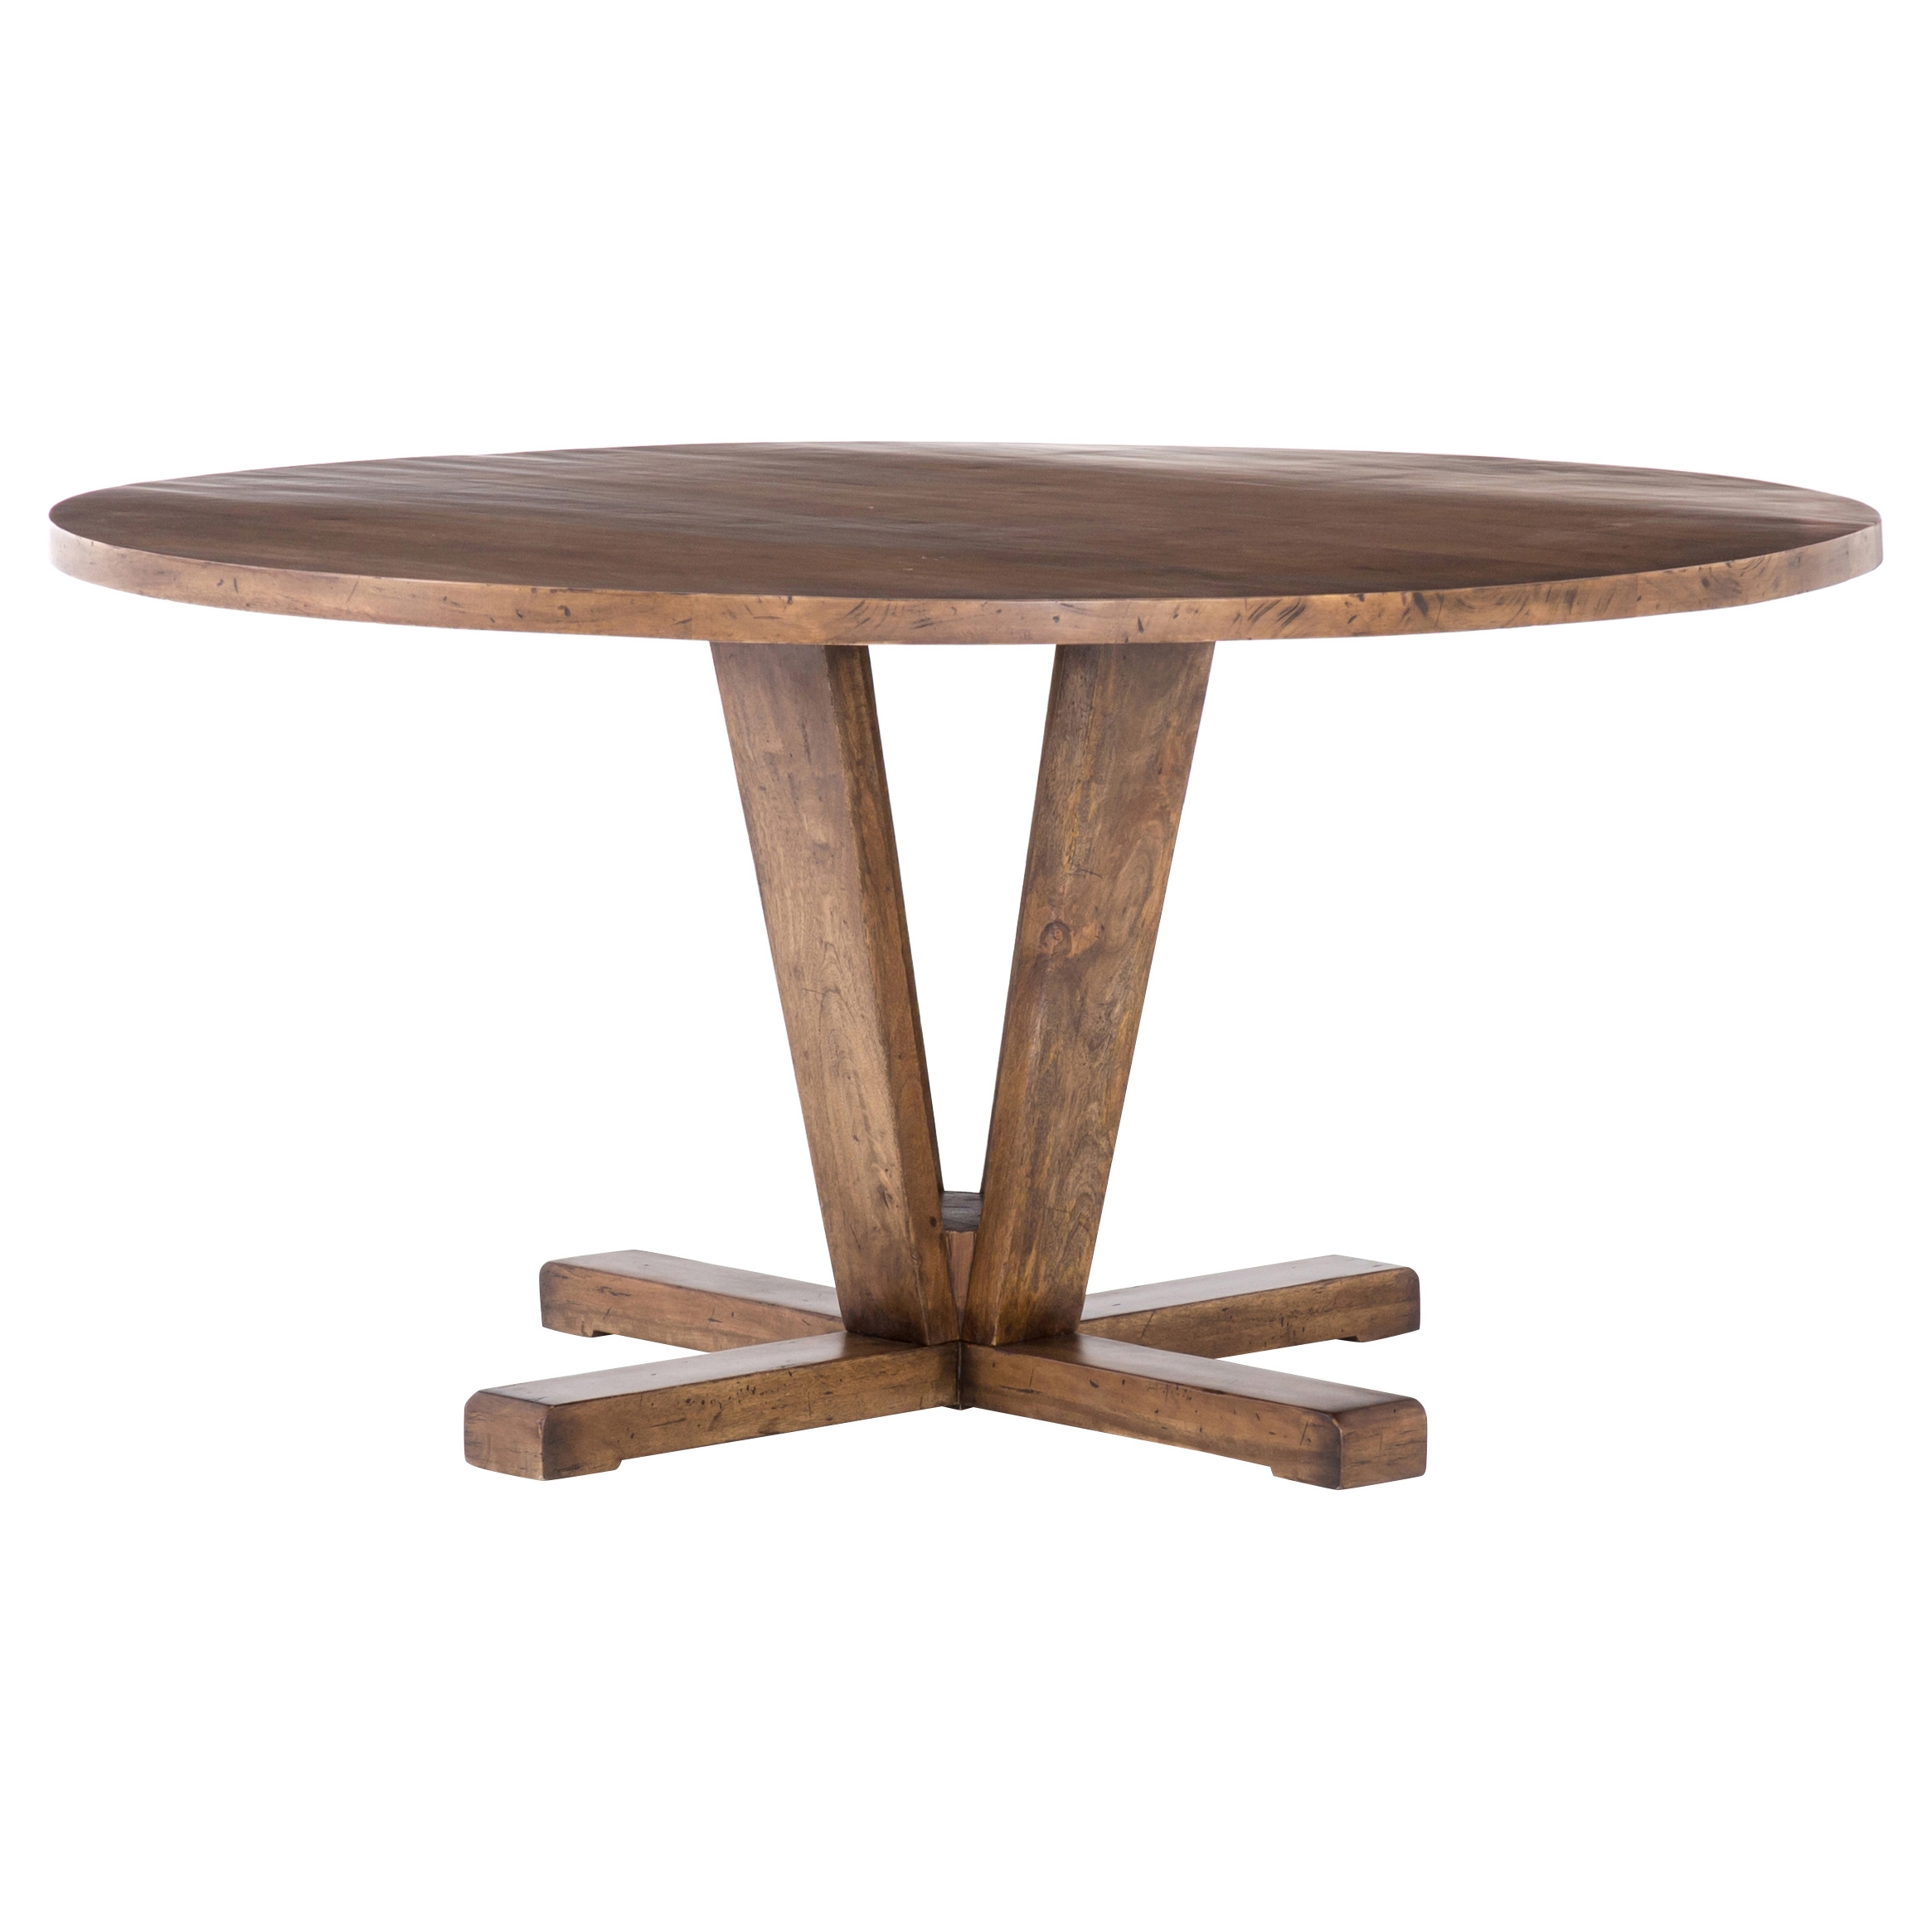 Camille Modern Classic Round Reclaimed Mango Wood Dining Table - 60D - Image 1